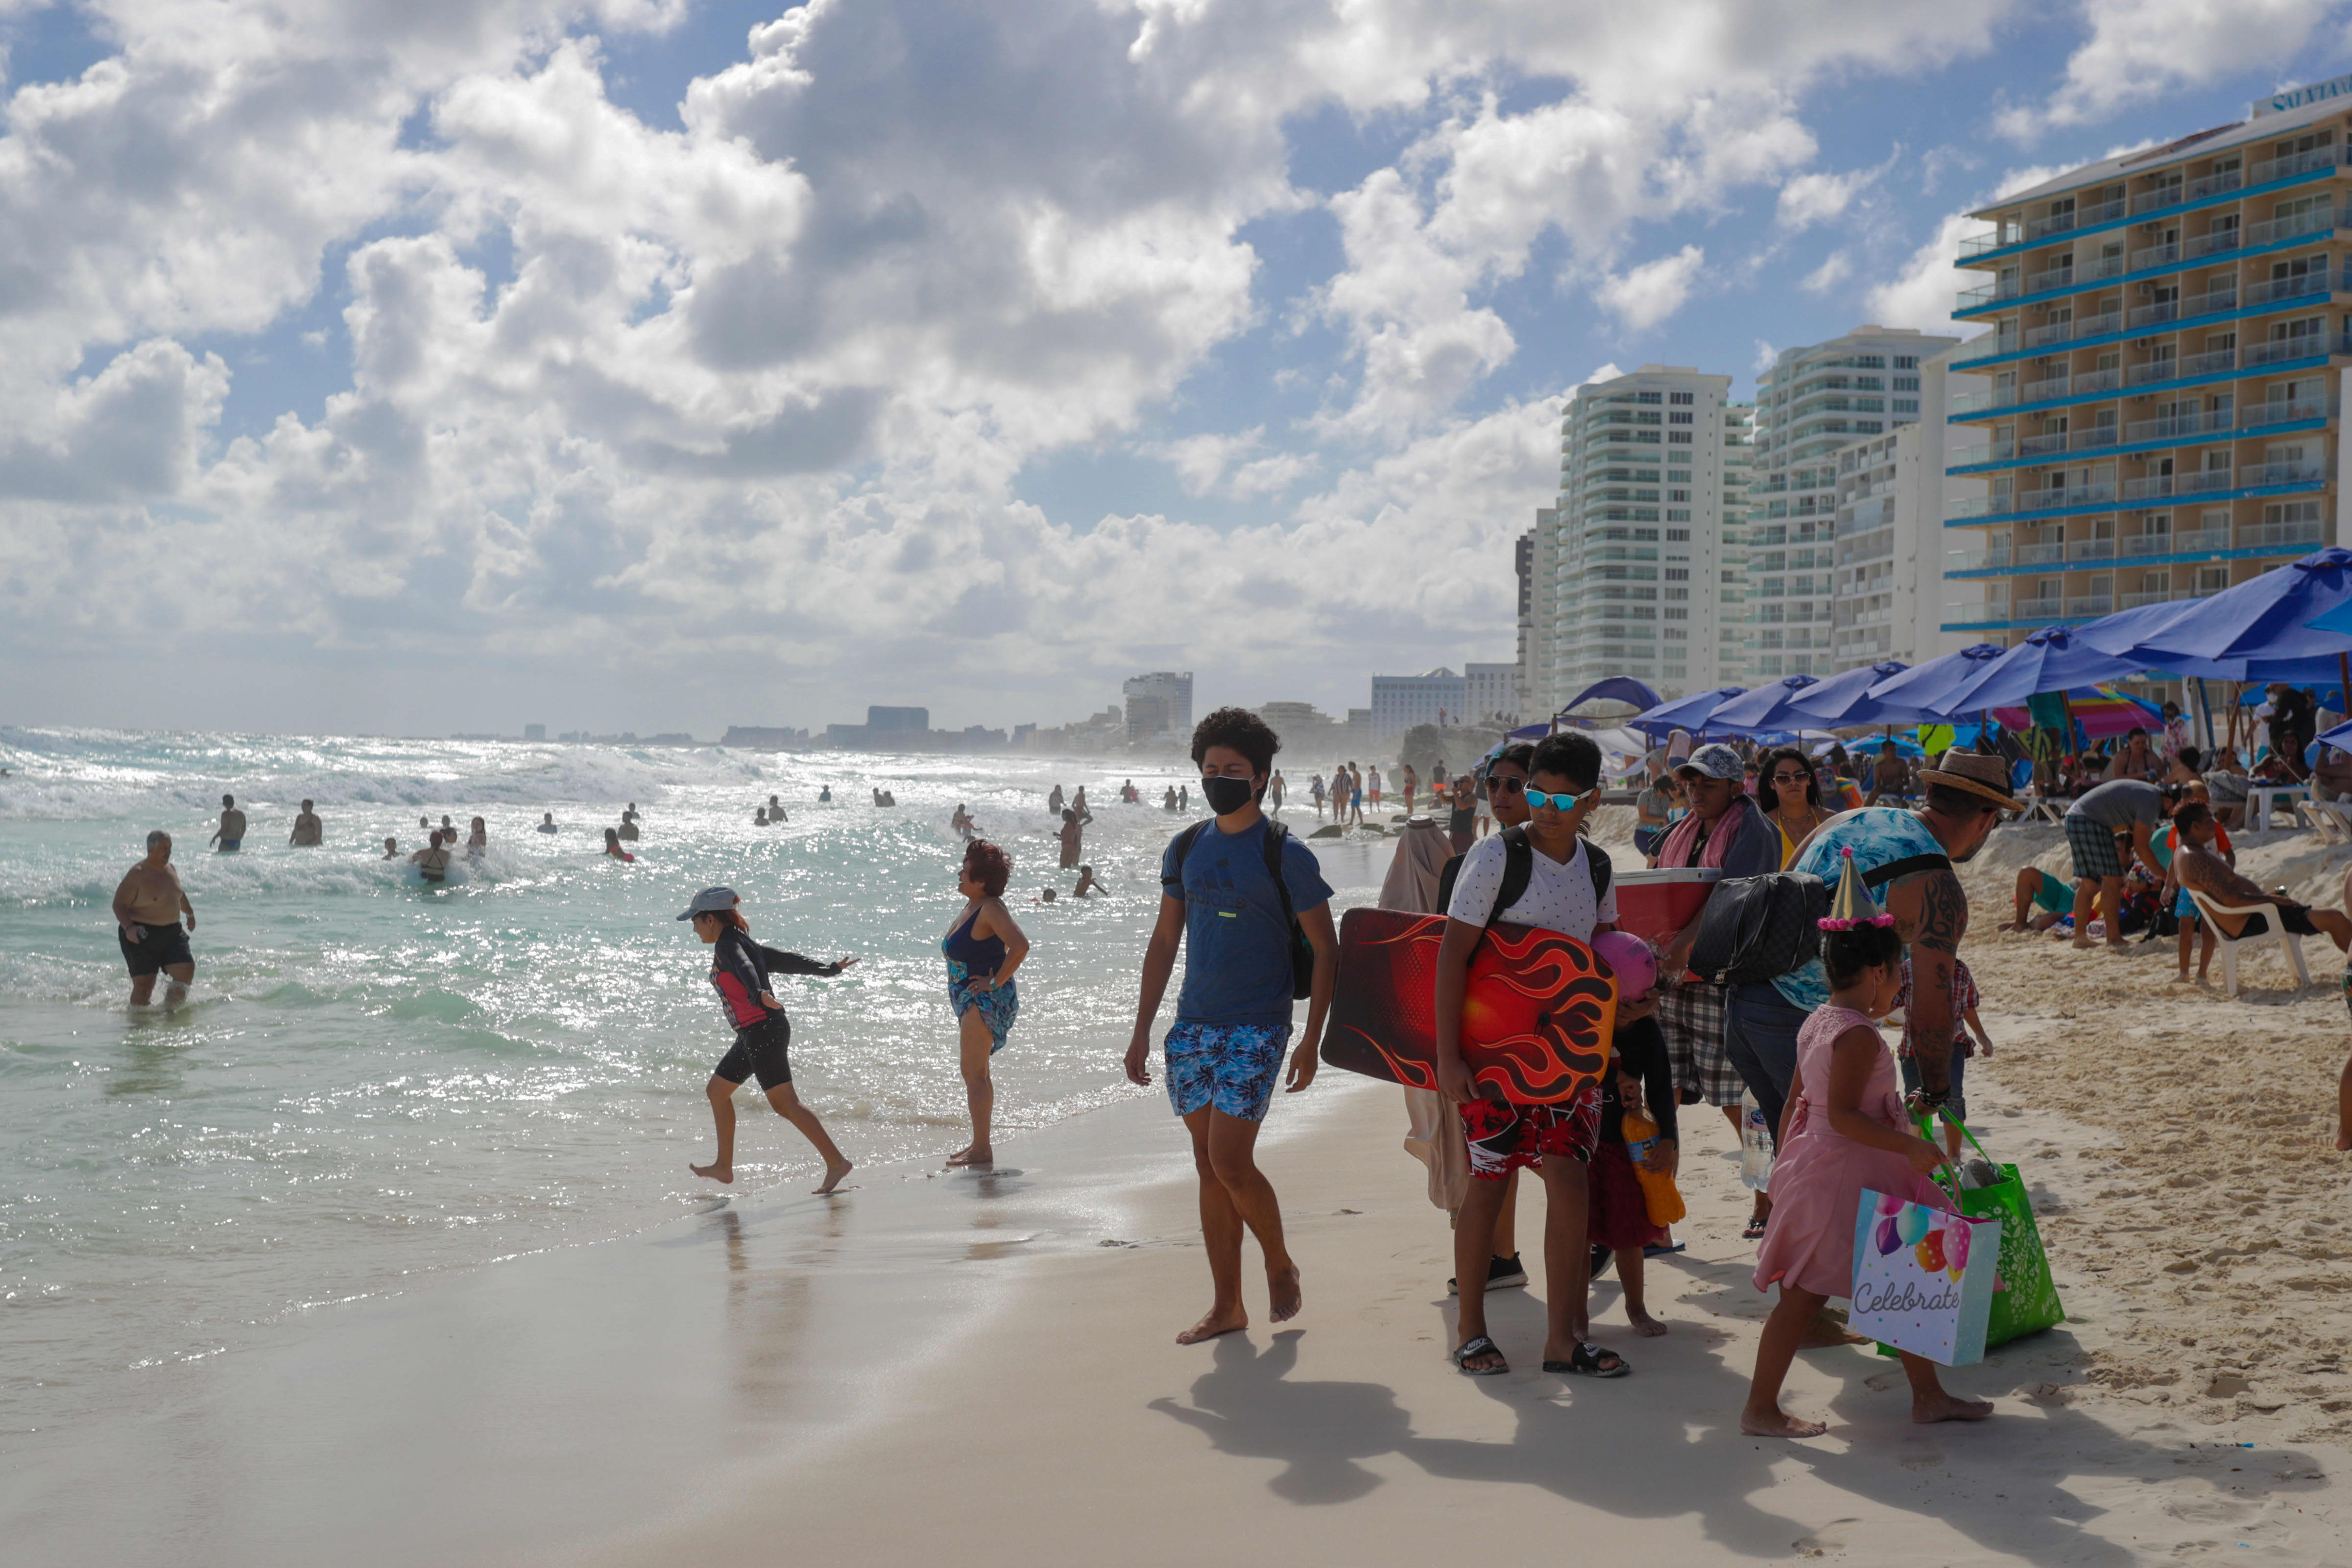 Ted Cruz gets slammed, but Americans are flocking to Cancun